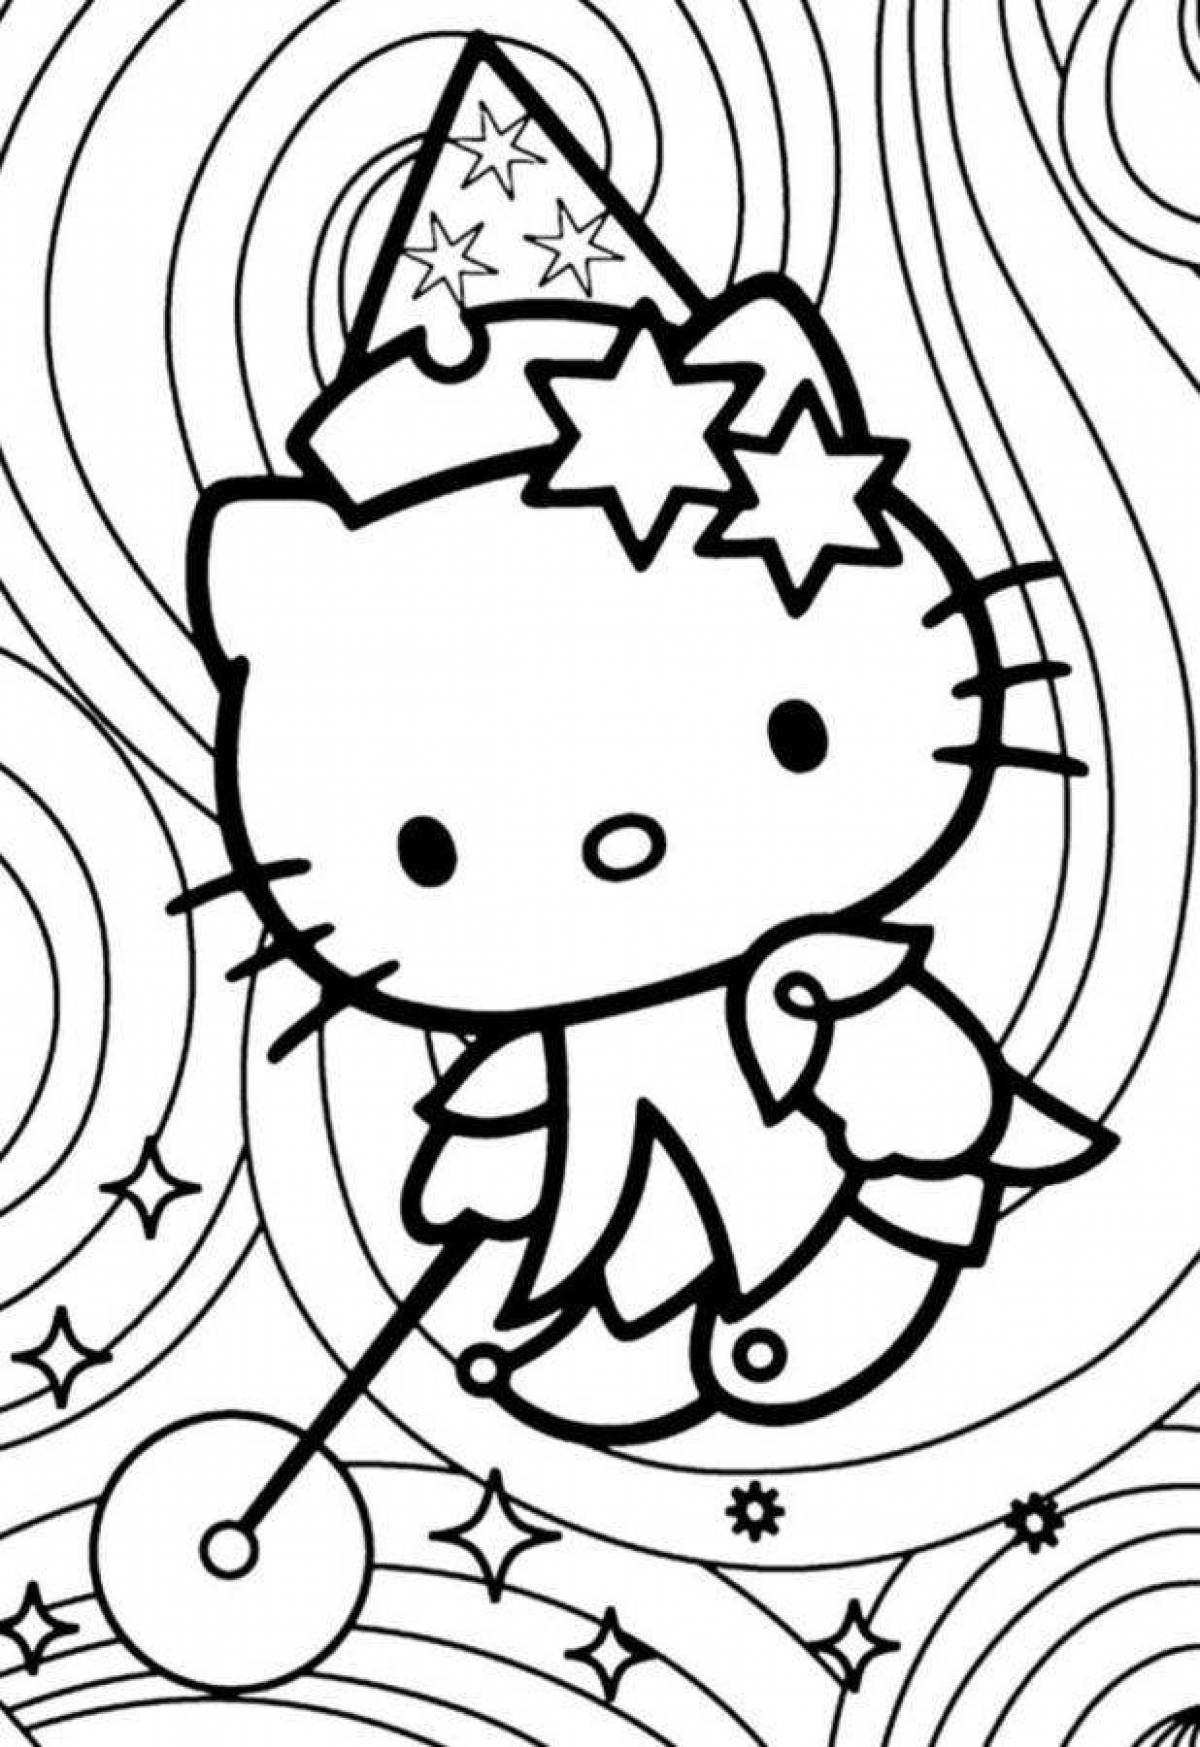 Spooky halloween kitty coloring book